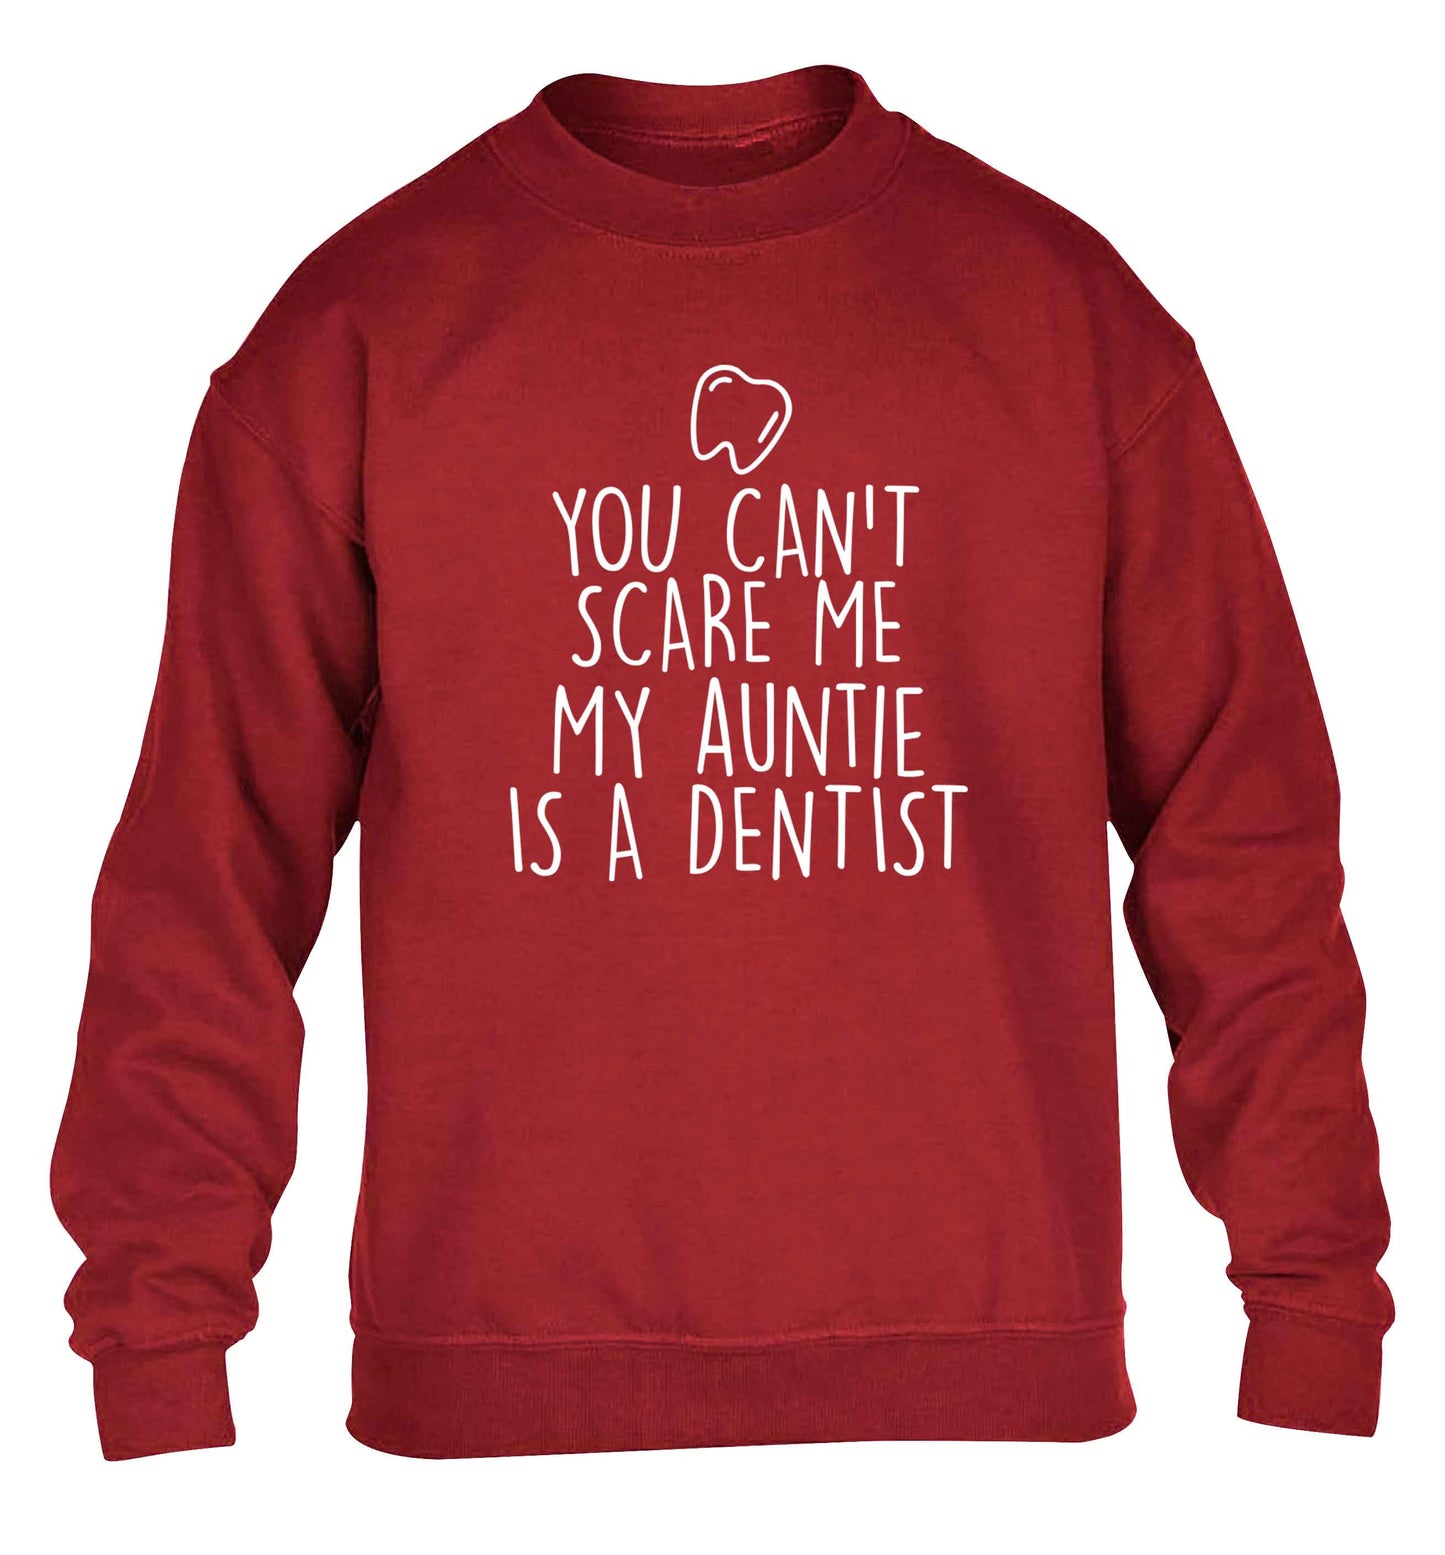 You can't scare me my auntie is a dentist children's grey sweater 12-13 Years